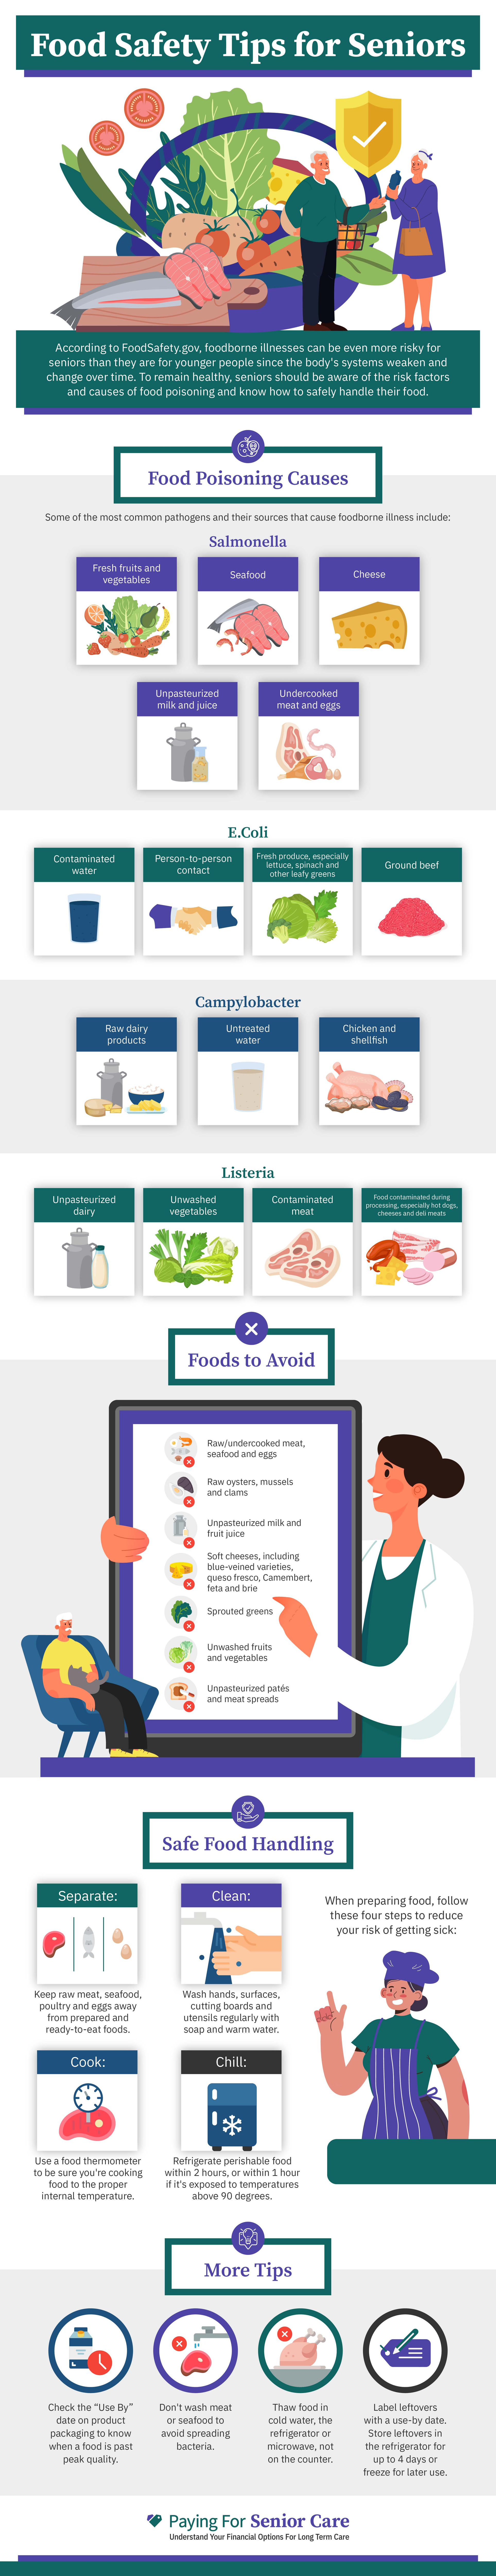 Food Safety for Seniors Infographic